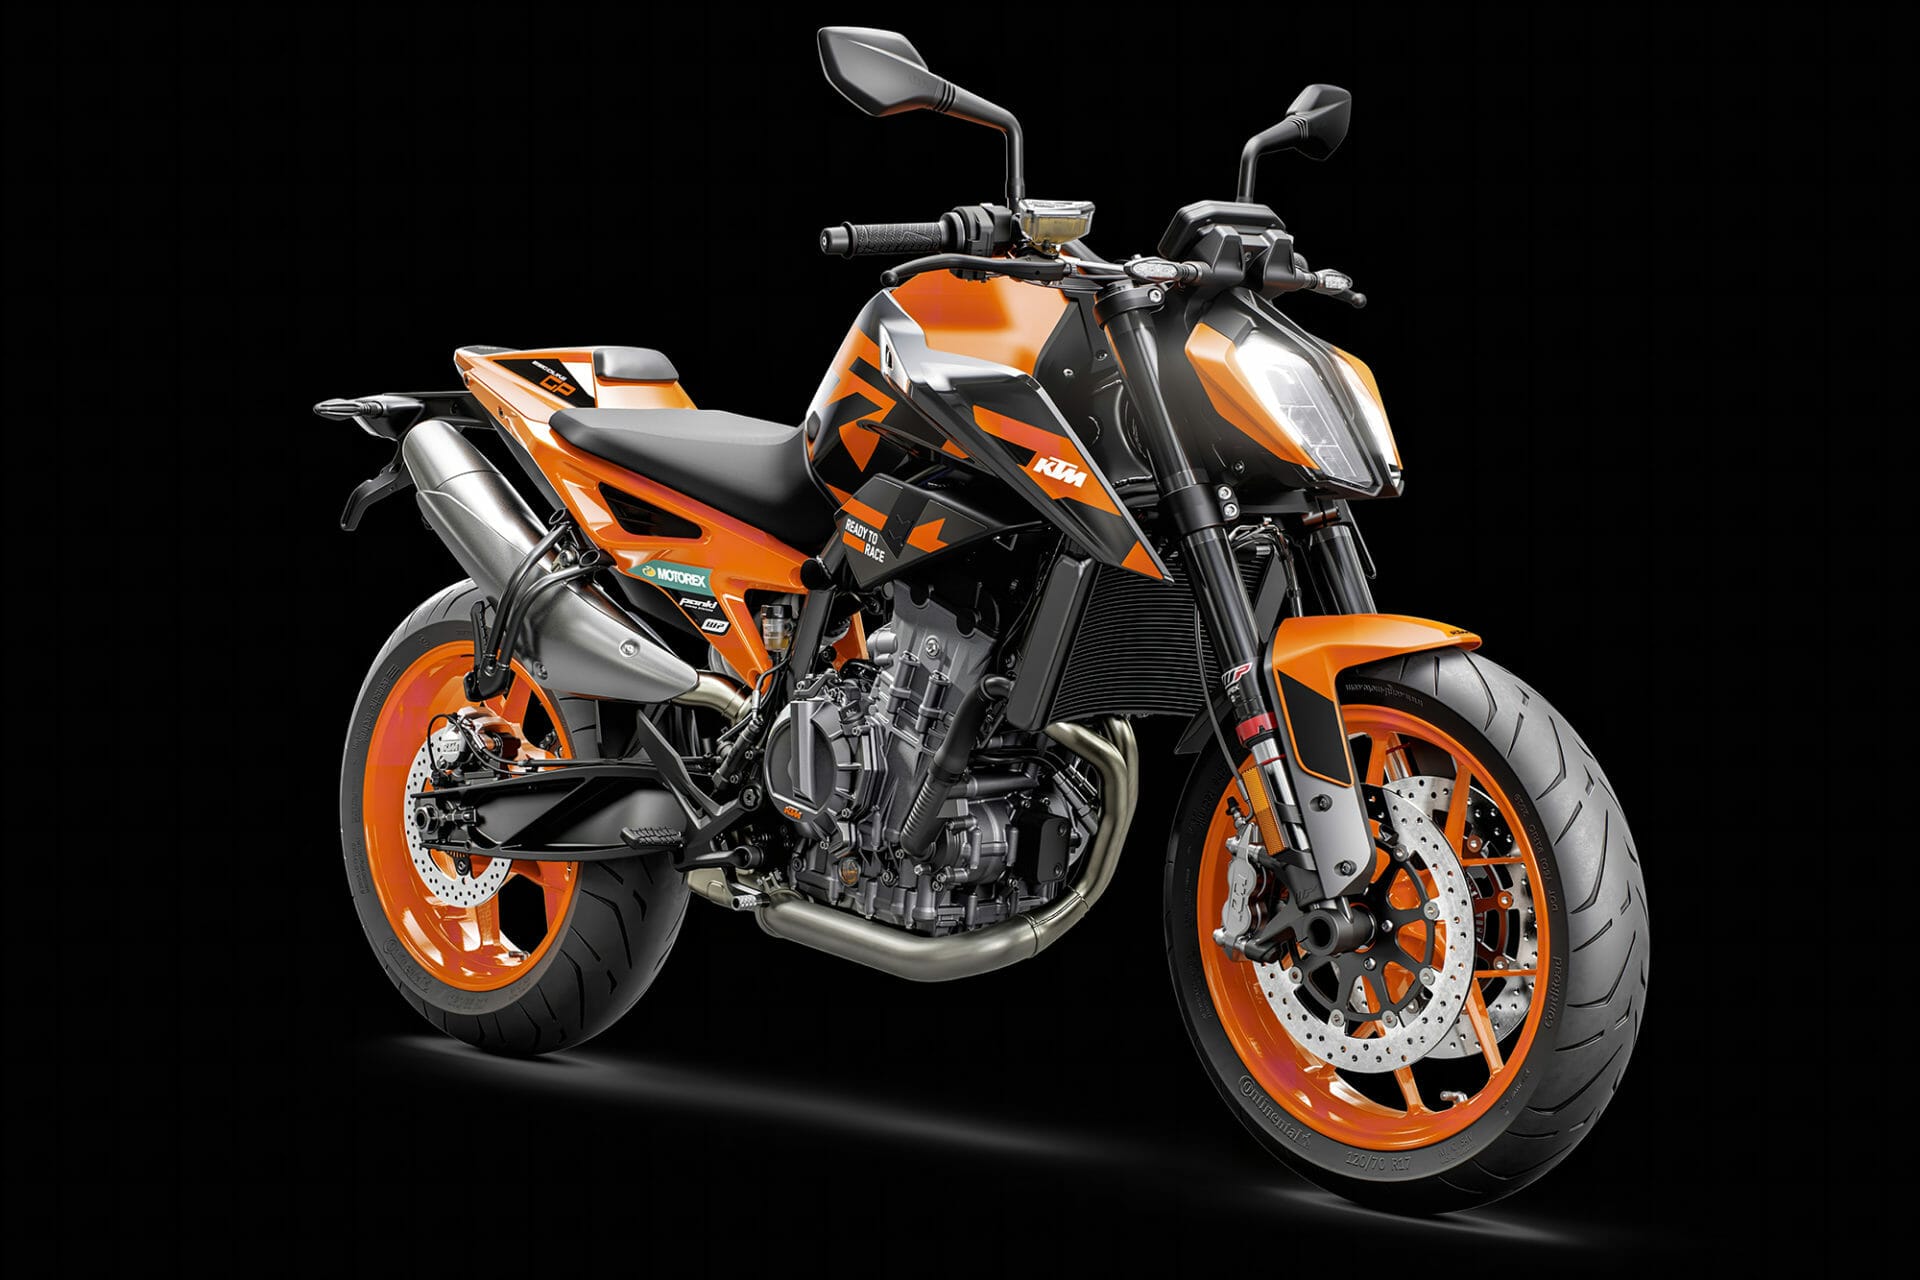 KTM 890 Duke GP
- also in the MOTORCYCLES.NEWS APP